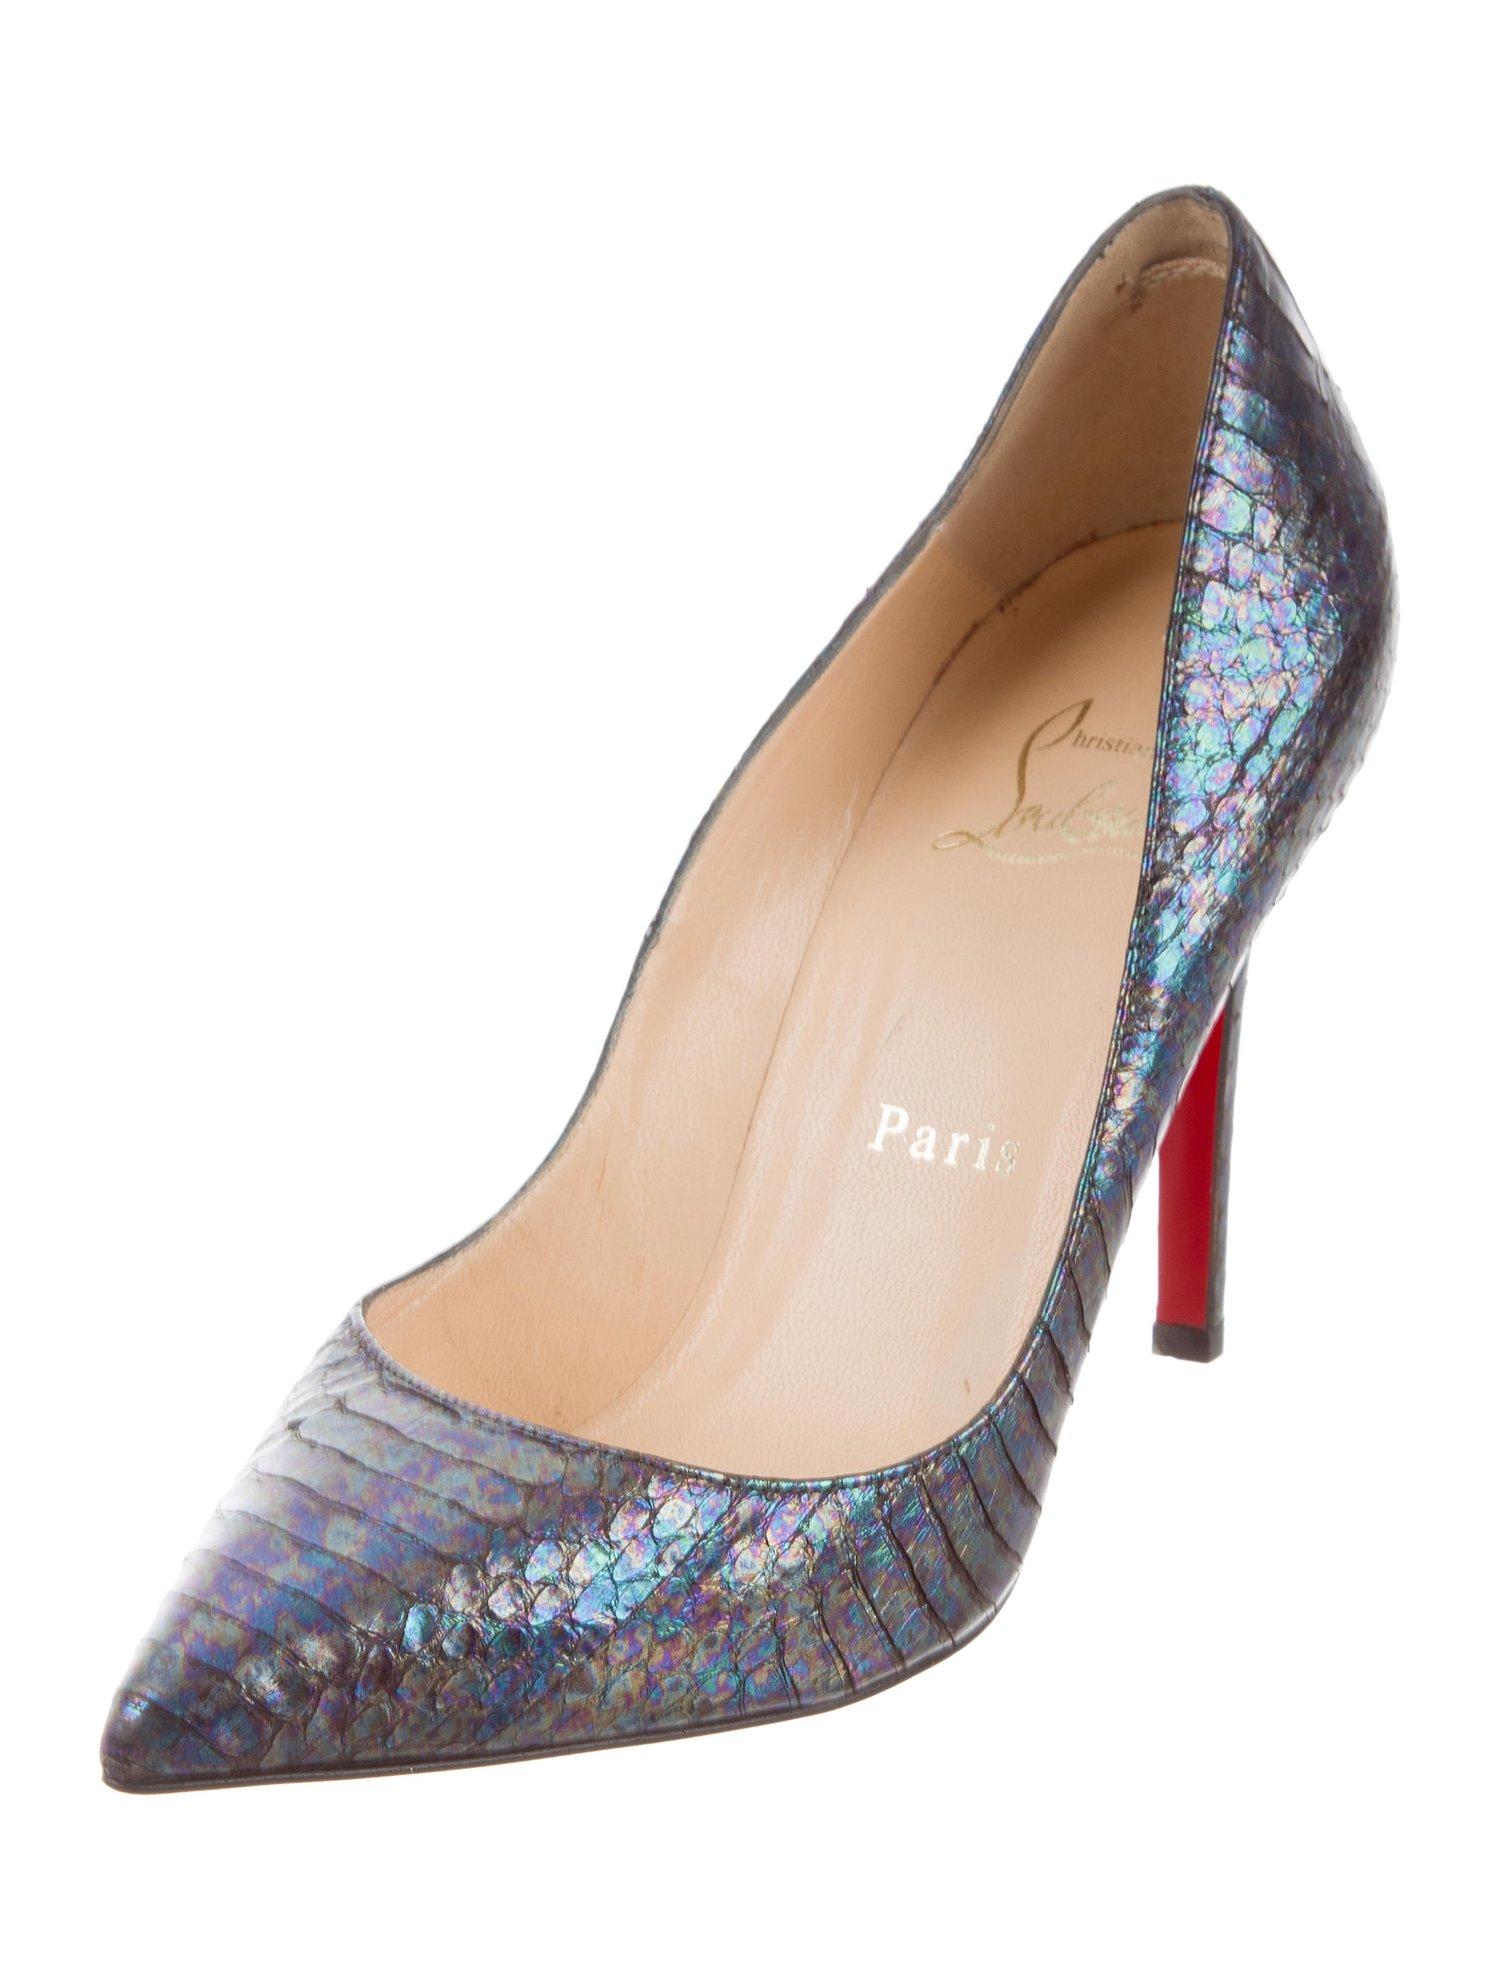 Gray Christian Louboutin NEW MultiColor Iridescent Snake Evening Heels Pumps in Box